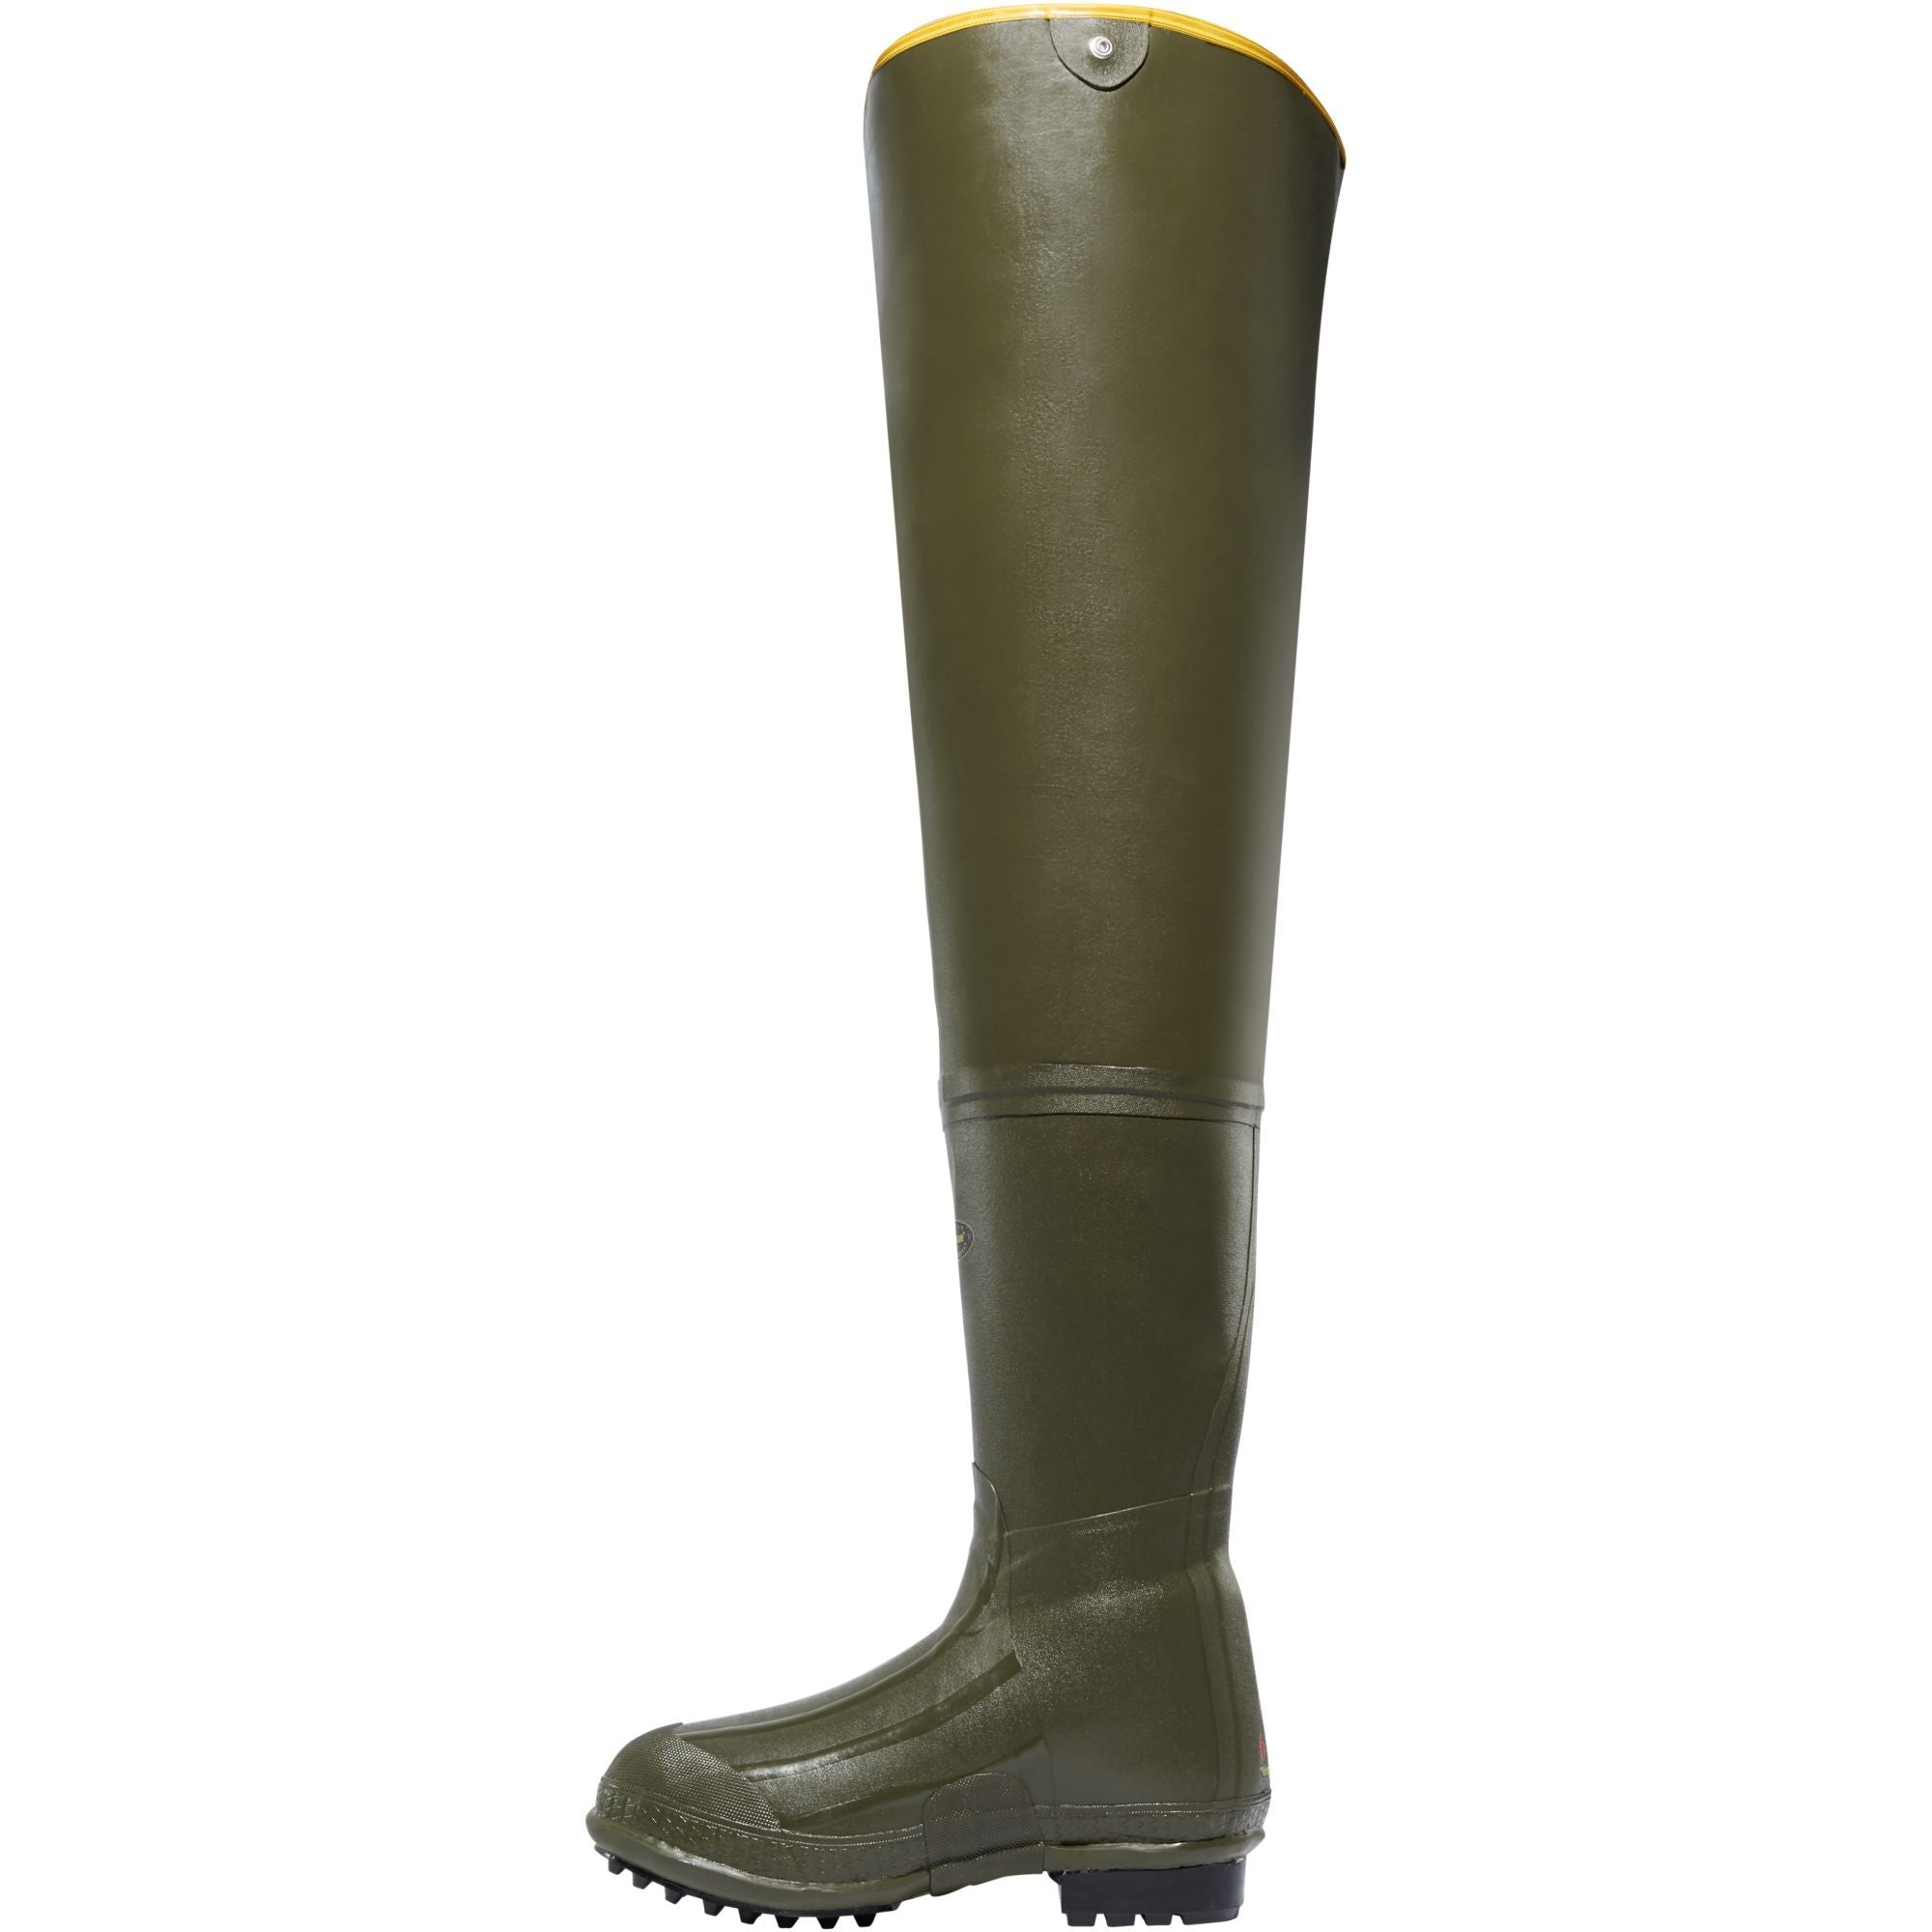 LaCrosse Men's Big Chief 32" OD Ins Rubber Work Boot - Green - 700001  - Overlook Boots